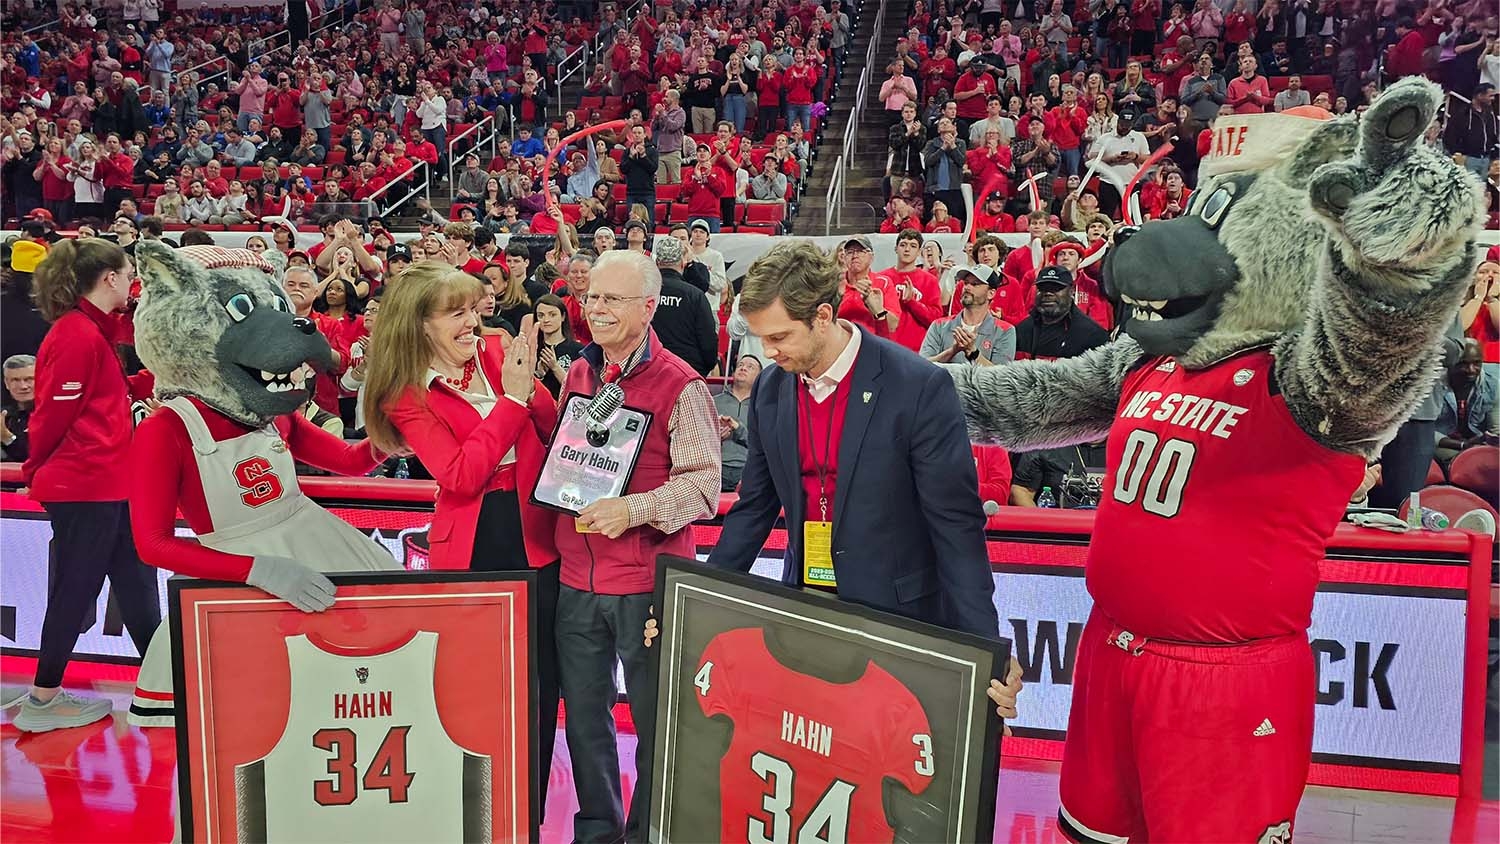 Gary Hahn is recognized on the court of PNC Arena after calling his last men's basketball game earlier this week.